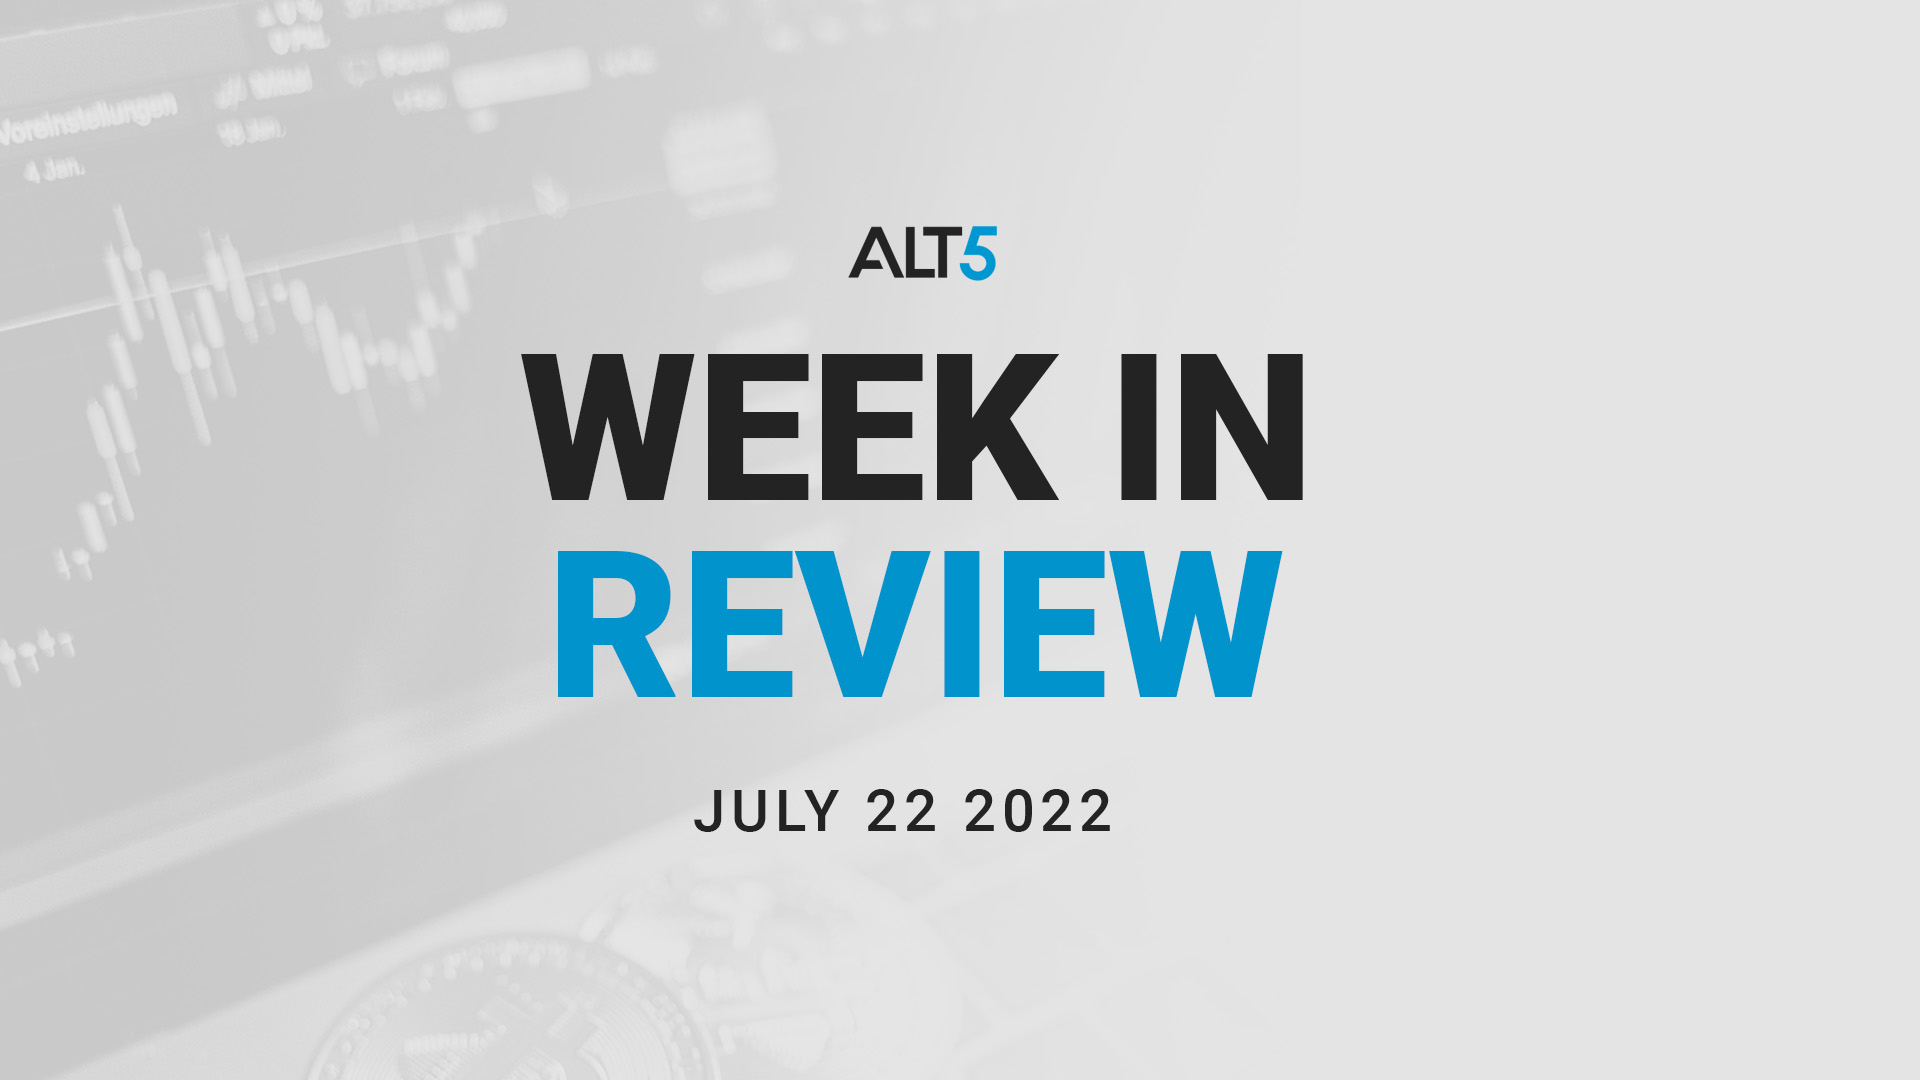 Week in review: July 22 2022 - Recent Crypto Gains Viewed in Short and Medium-term Perspectives